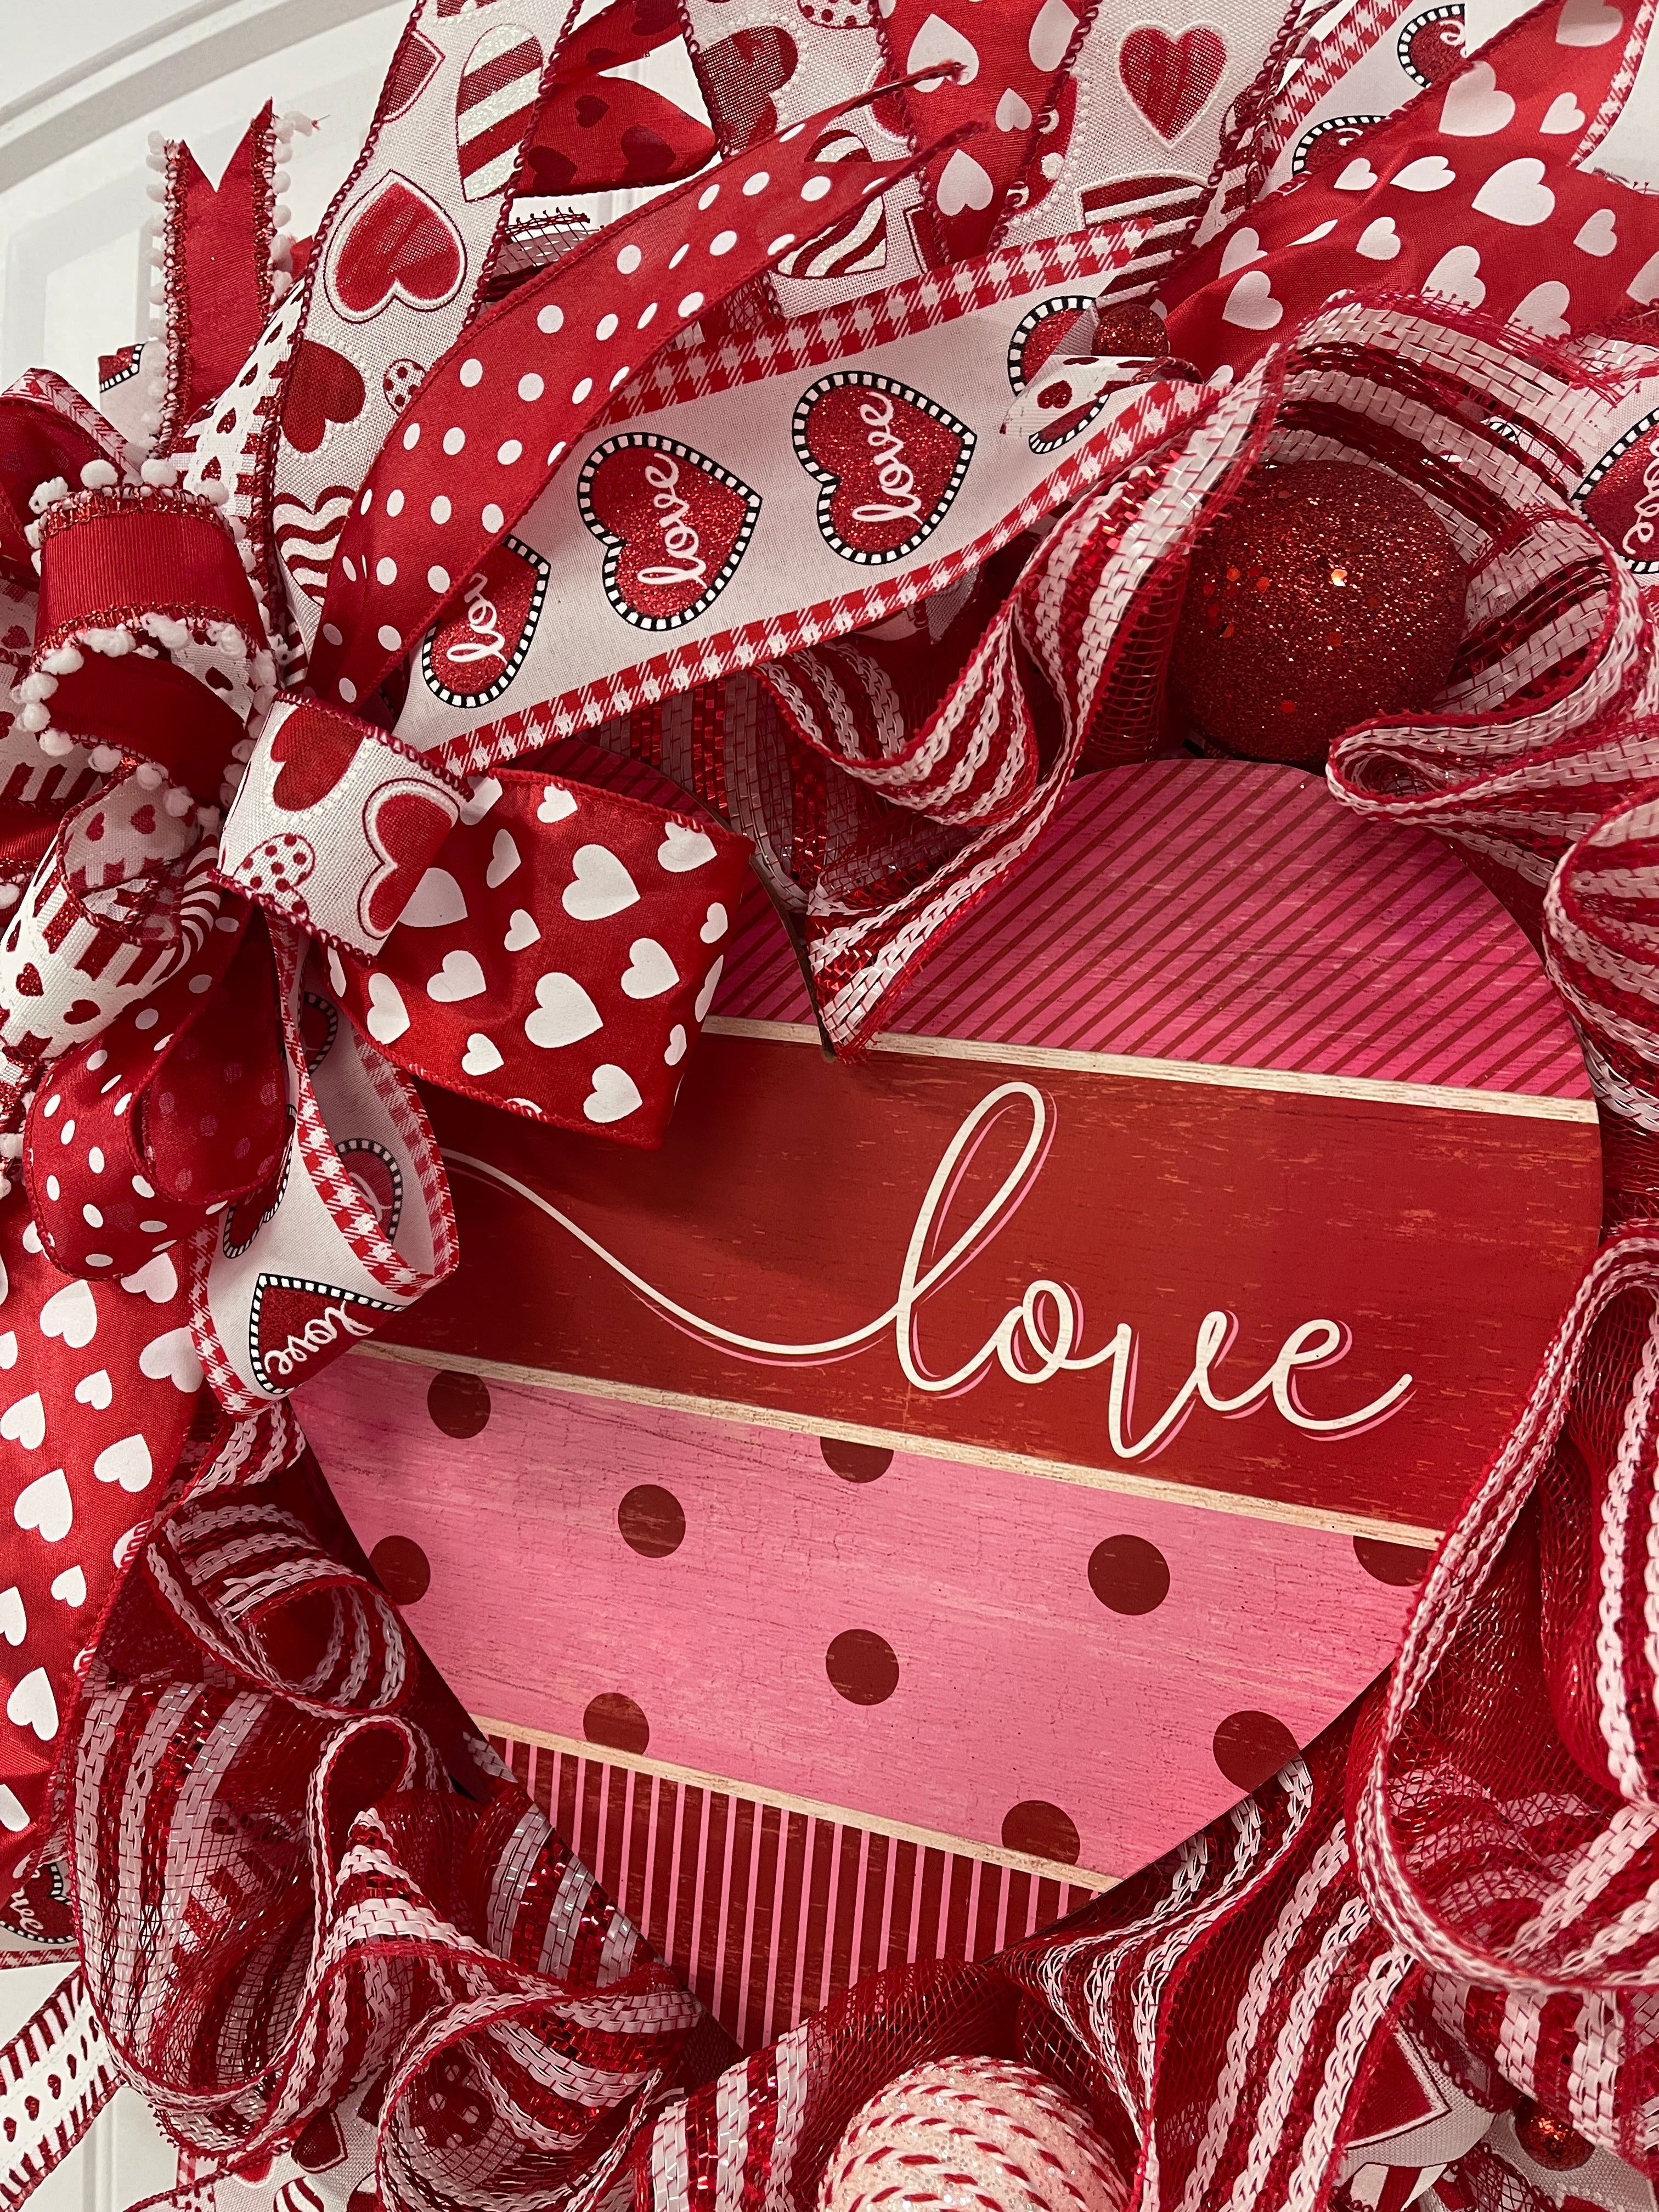 Close Up Detail of a Red and White Bow filled with Red, White and Black Ribbons, around a Heart Shaped Love Sign with large Red and White Balls